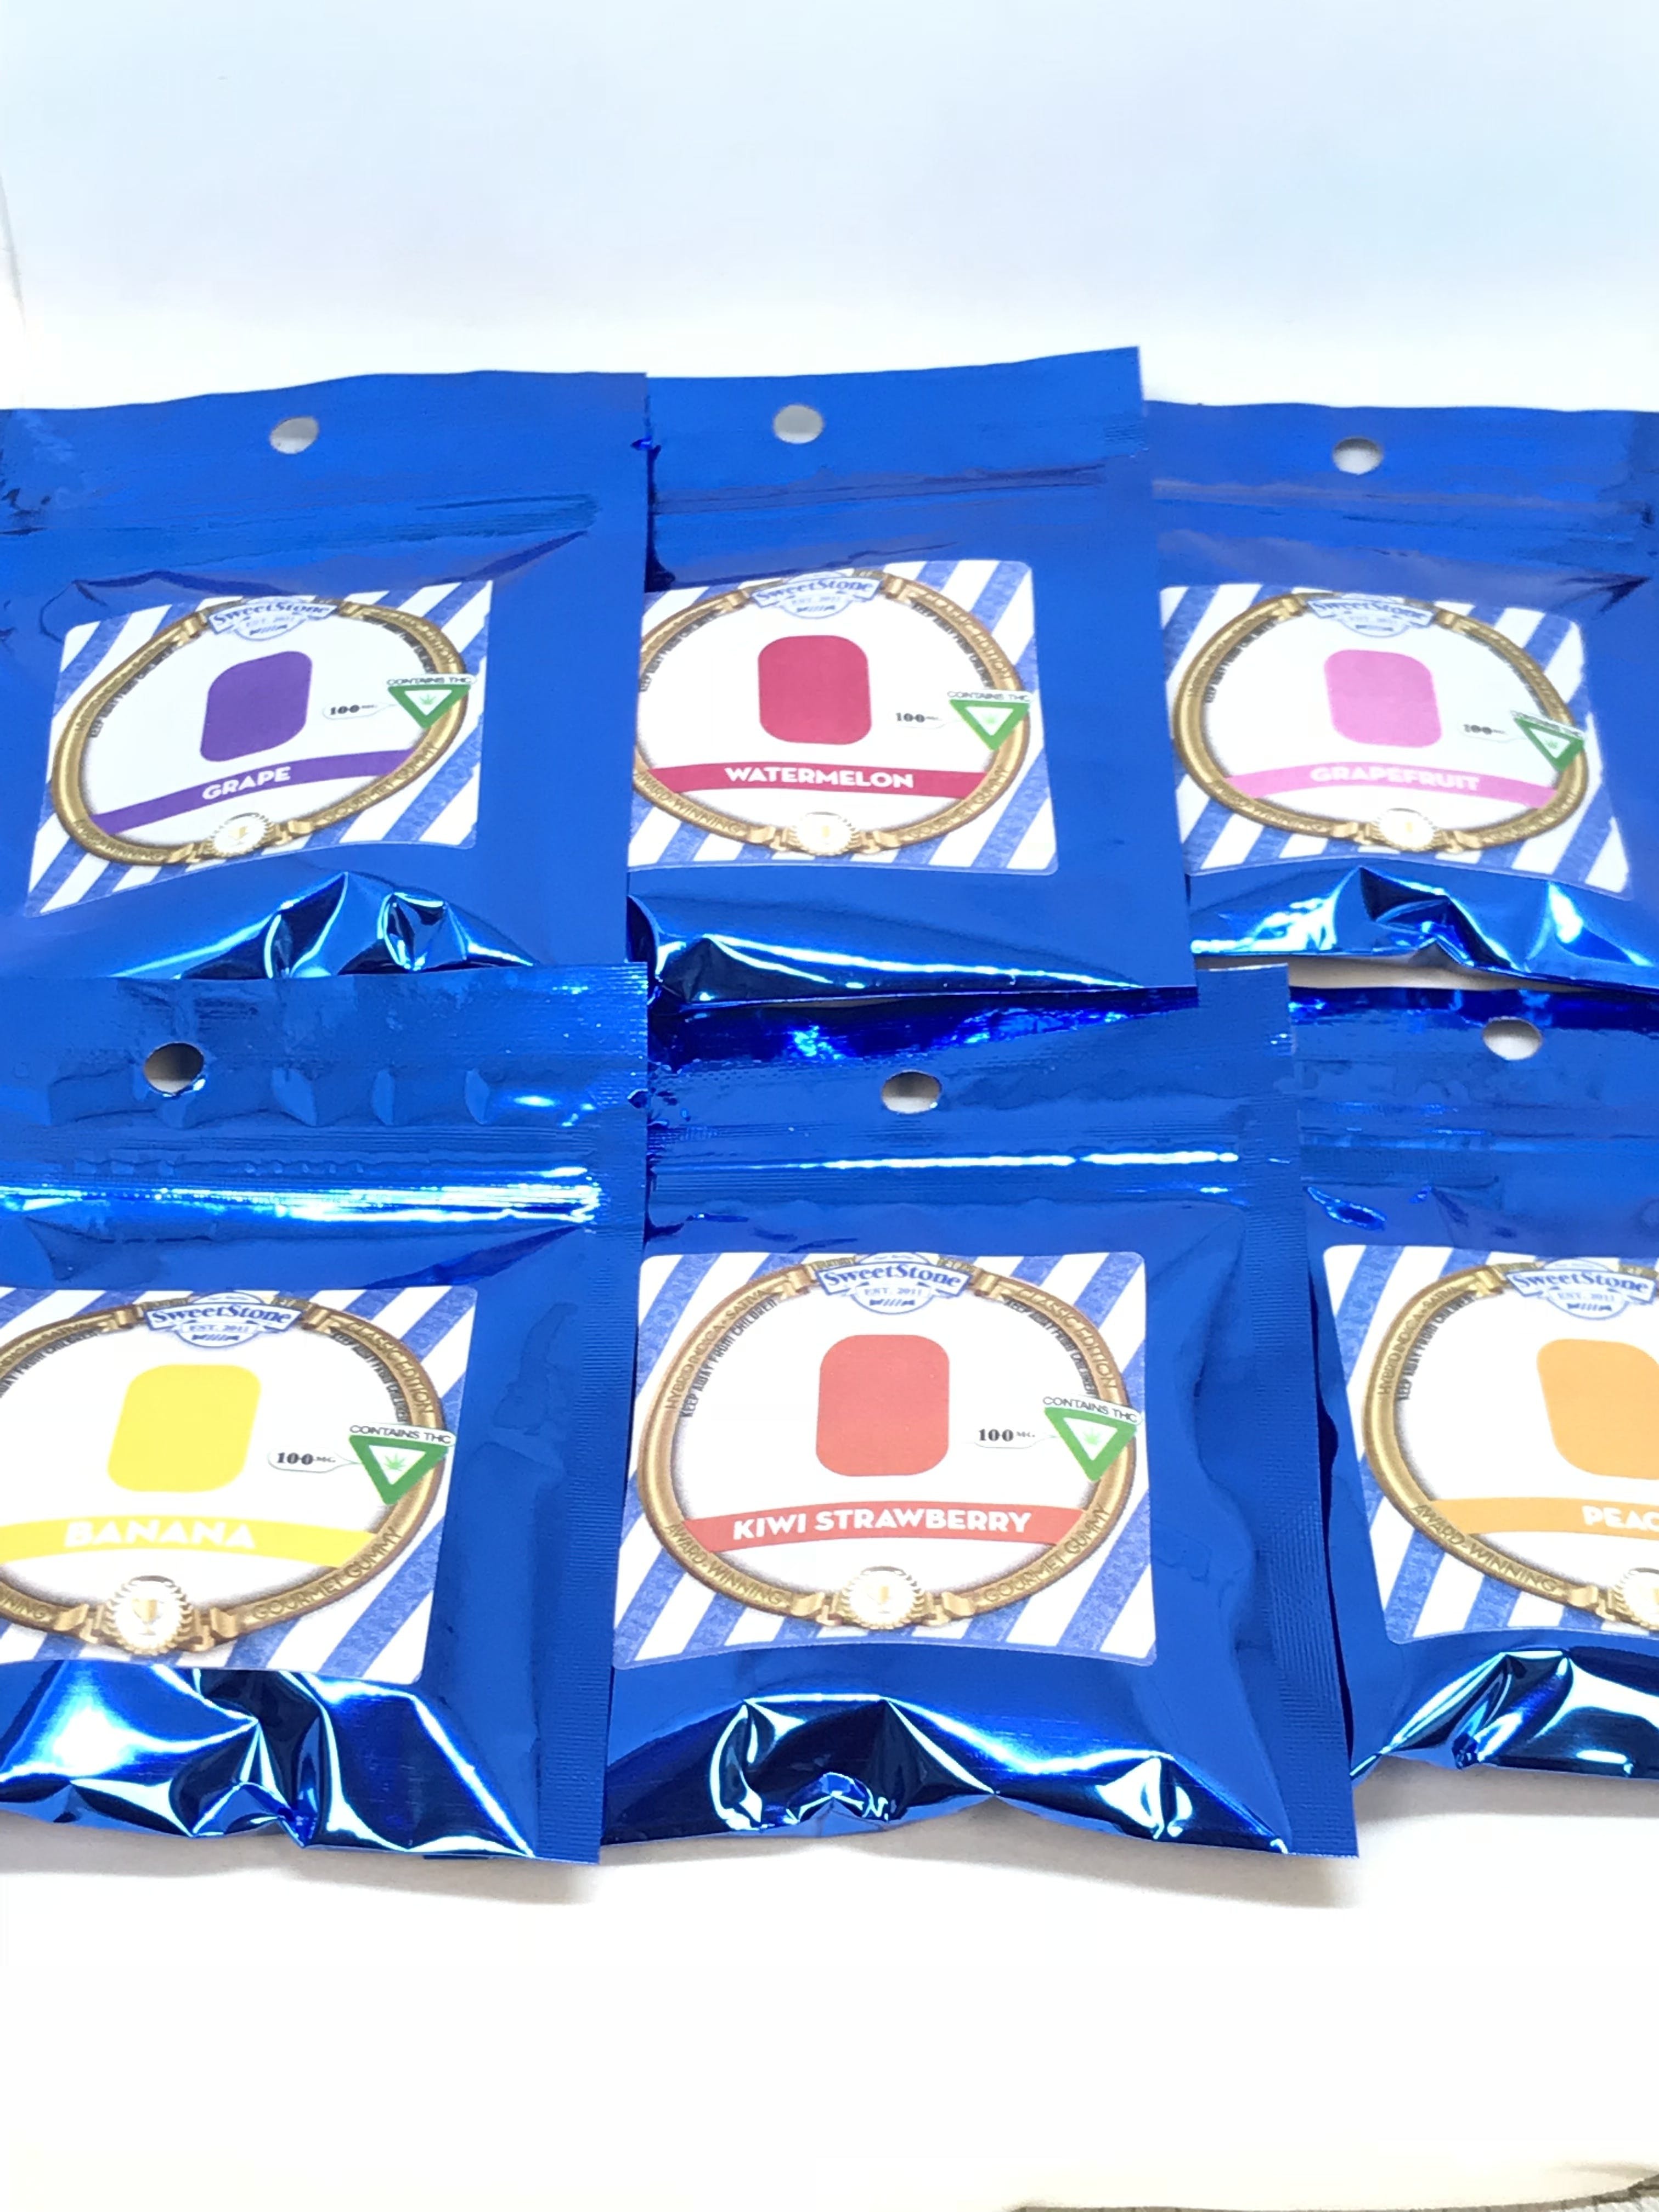 edible-sweet-stone-gummy-candy-strawberry-100mg